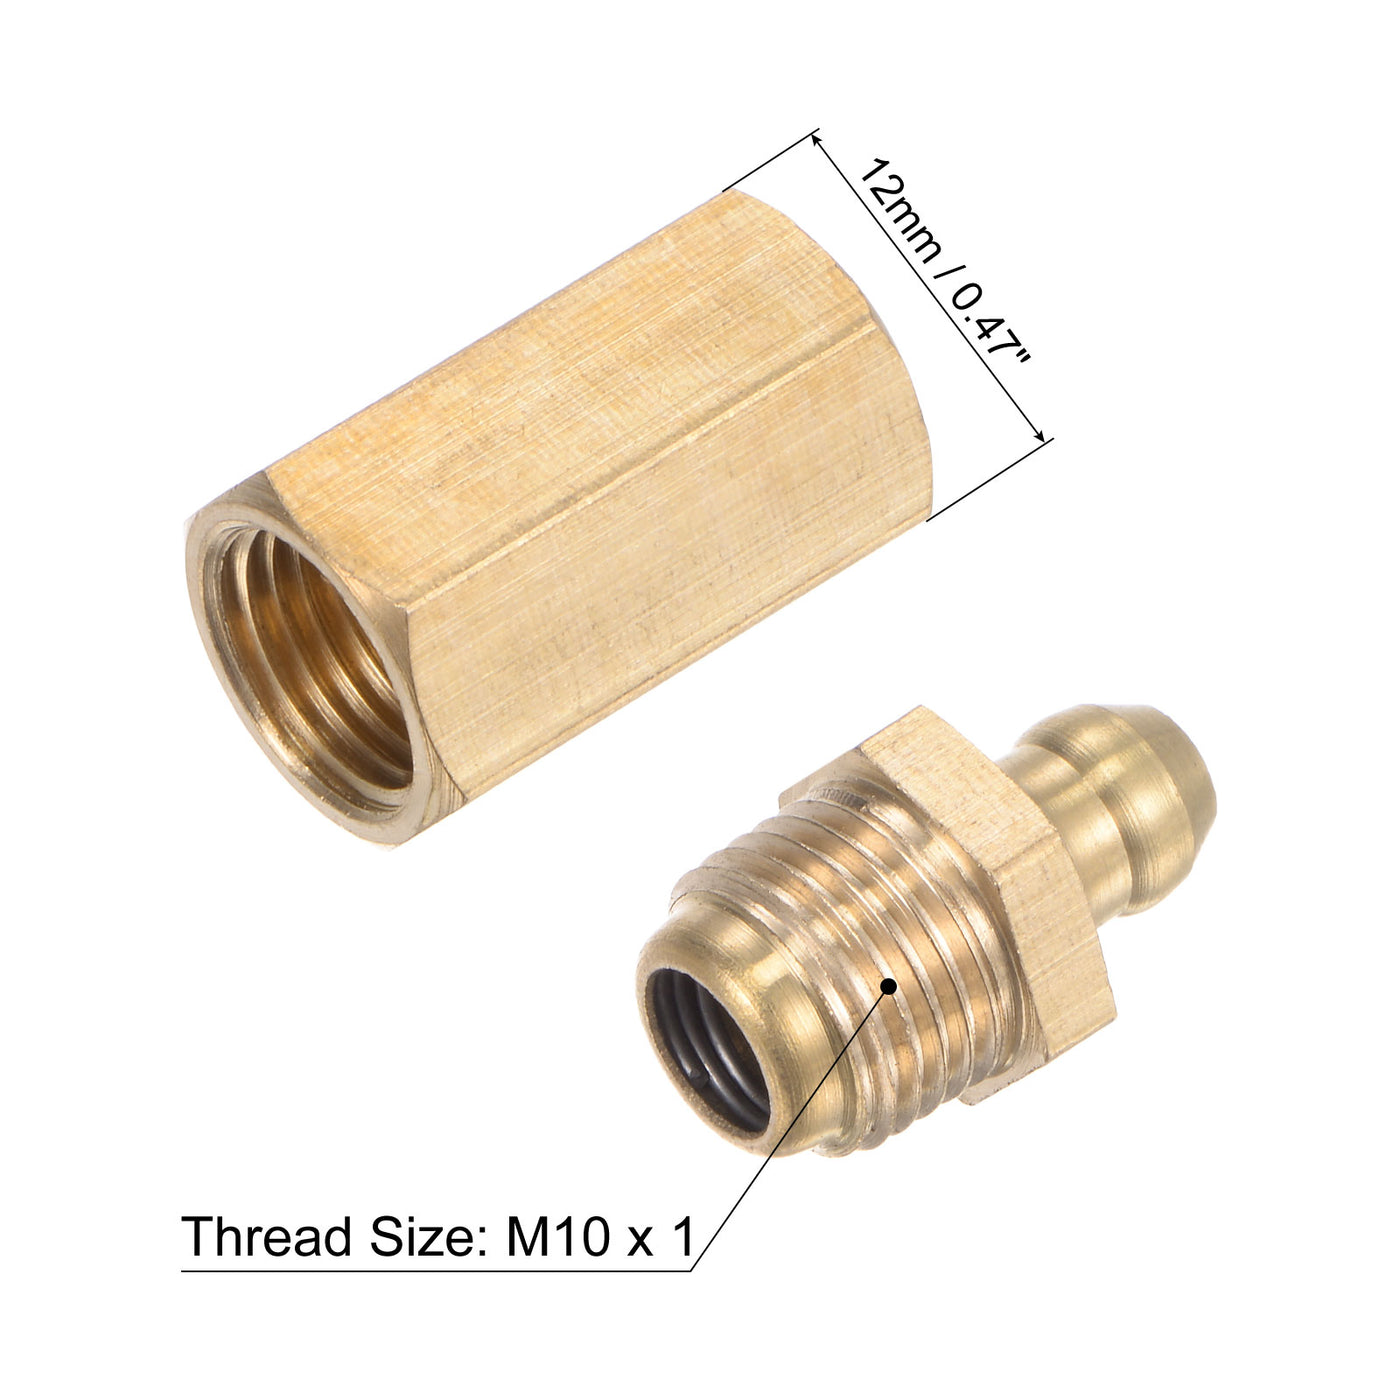 uxcell Uxcell Brass Straight Hydraulic Grease Fitting Accessories M10 x 1mm Thread, 2Pcs